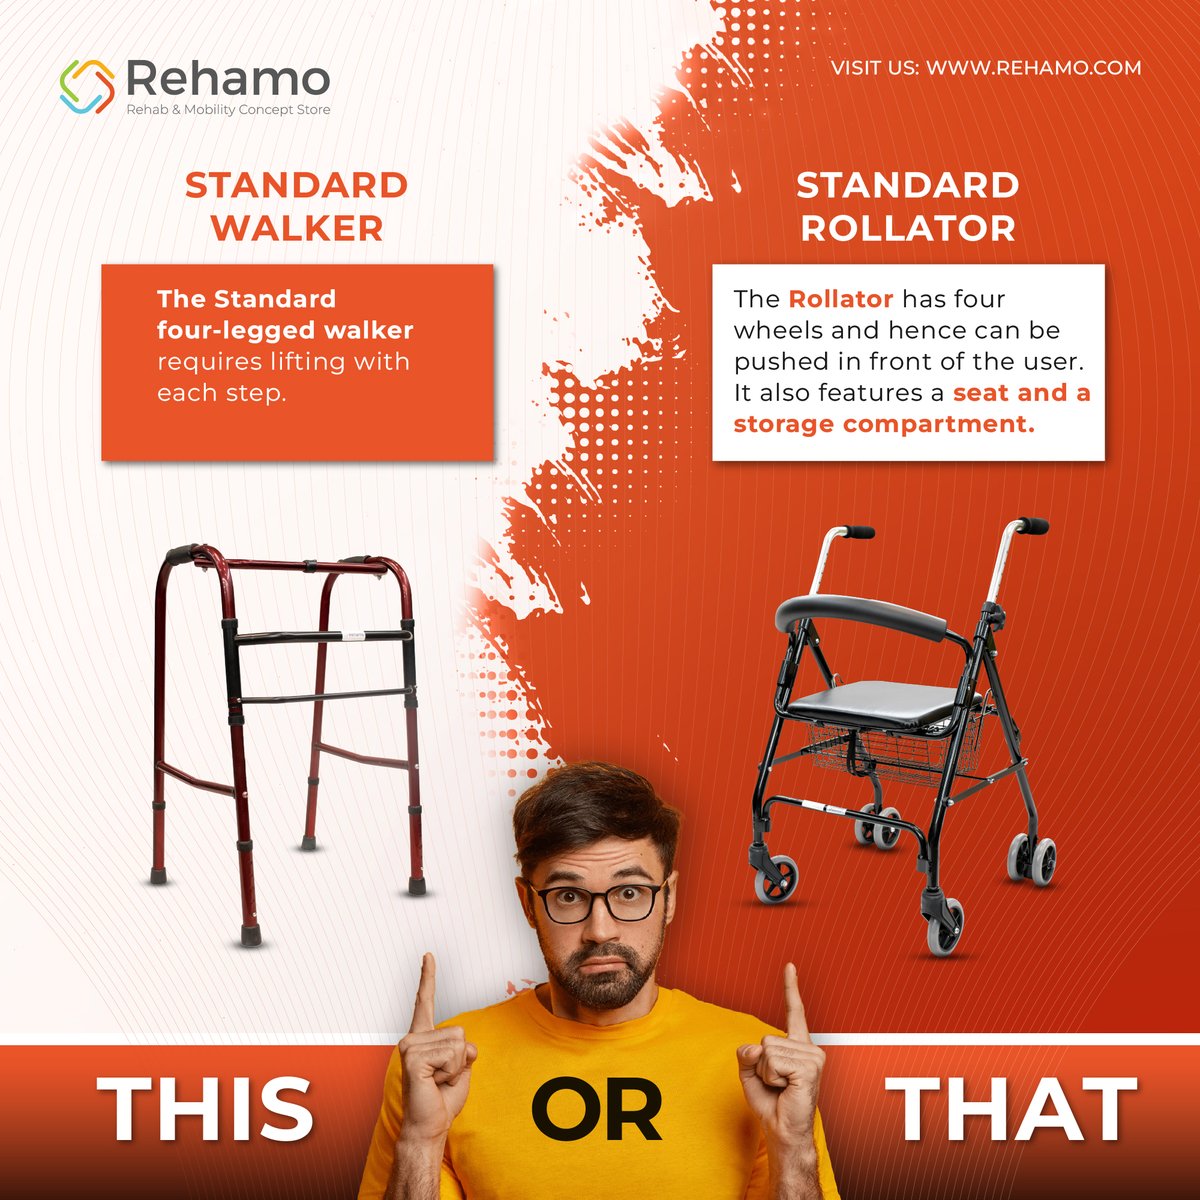 Rollie STD lessens the pressure on weak muscles & joints of the user. This foldable rollator is made of aluminium, making it durable & sturdy.
#rehamo #rehabilitation #wheelchairs #userfriendly #balance #stability #heightadjustable #rollatorwalker #wheeledwalker